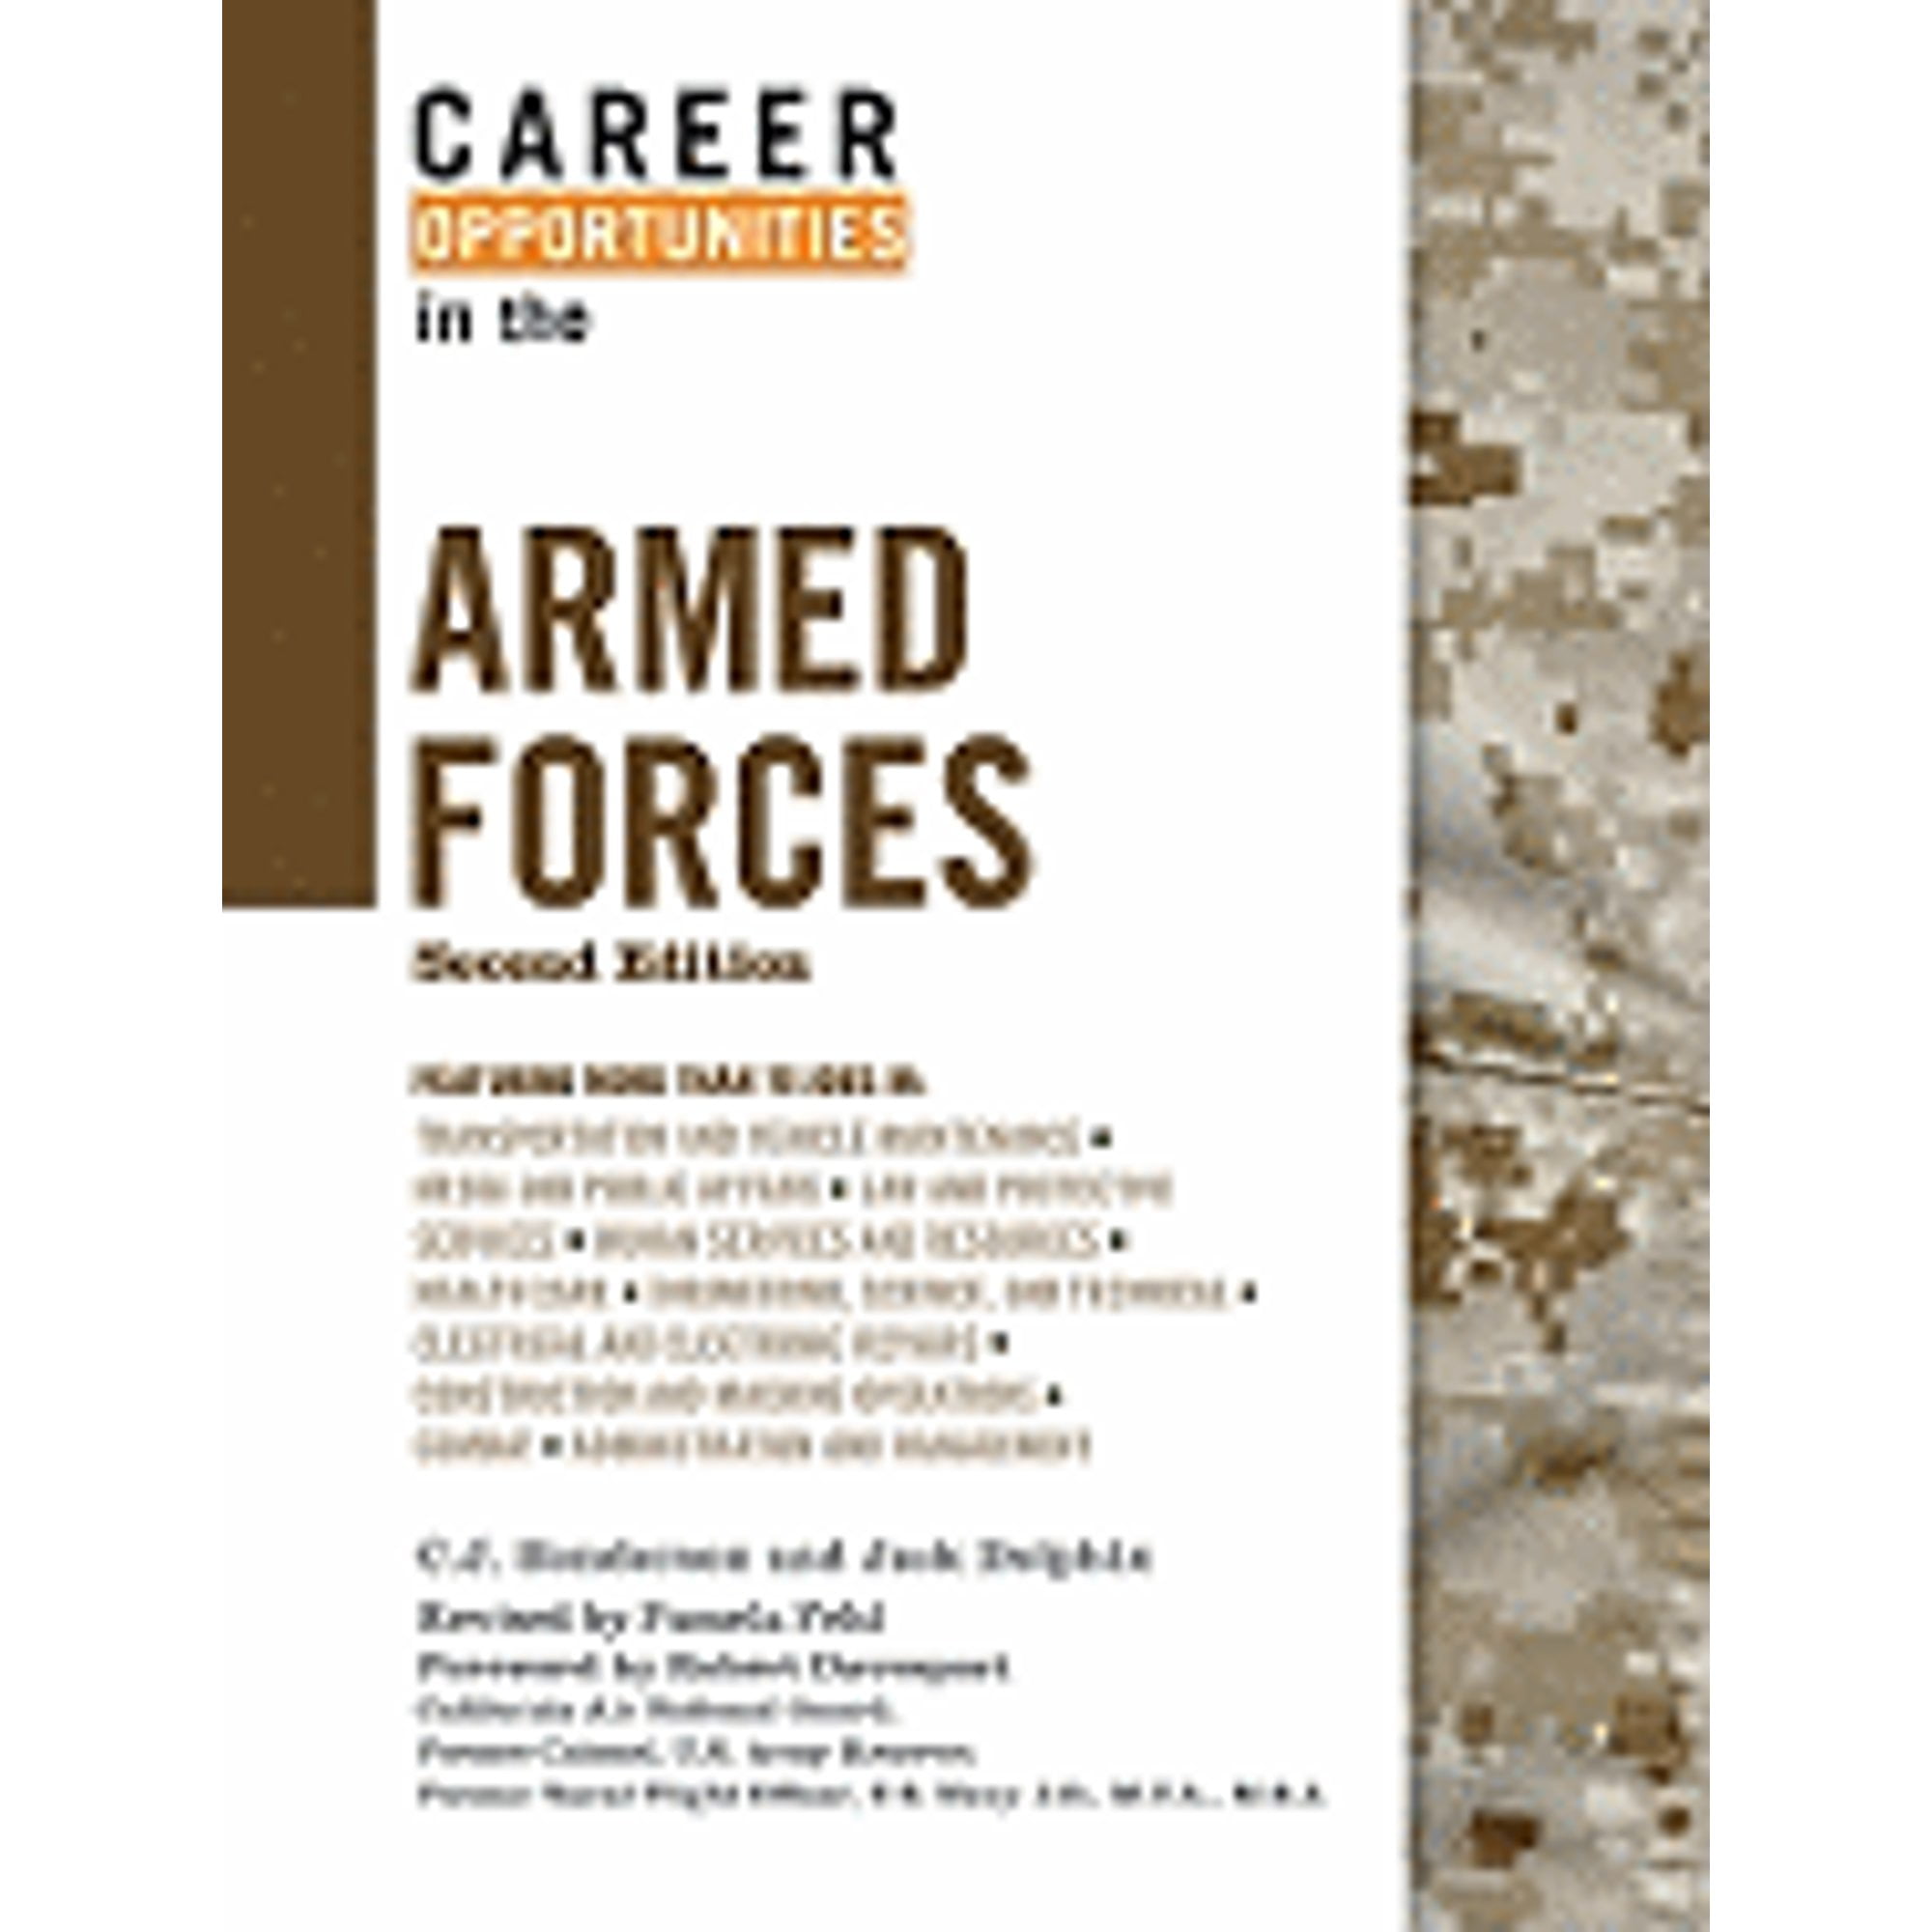 Pre-Owned Career Opportunities in the Armed Forces (Hardcover 9780816068302) by C J Henderson, Jack Dolphin, Robert Davenport